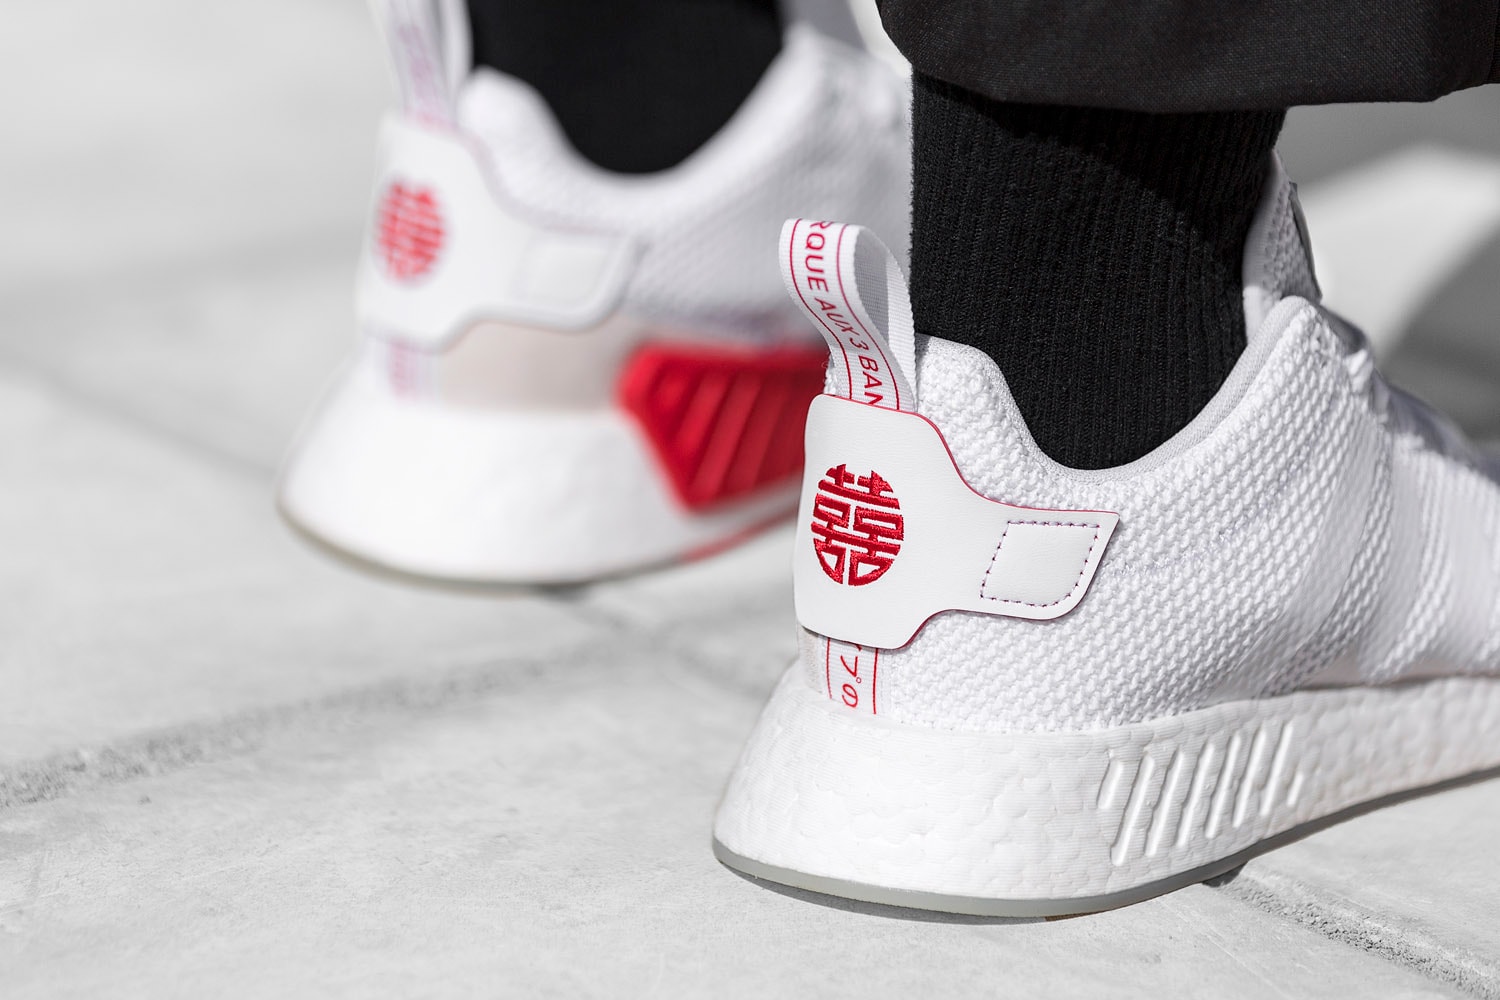 adidas Originals CNY Pack Release Info 2018  NMD R, EQT Support ADV Superstar Campus Year of the Dog chinese new year